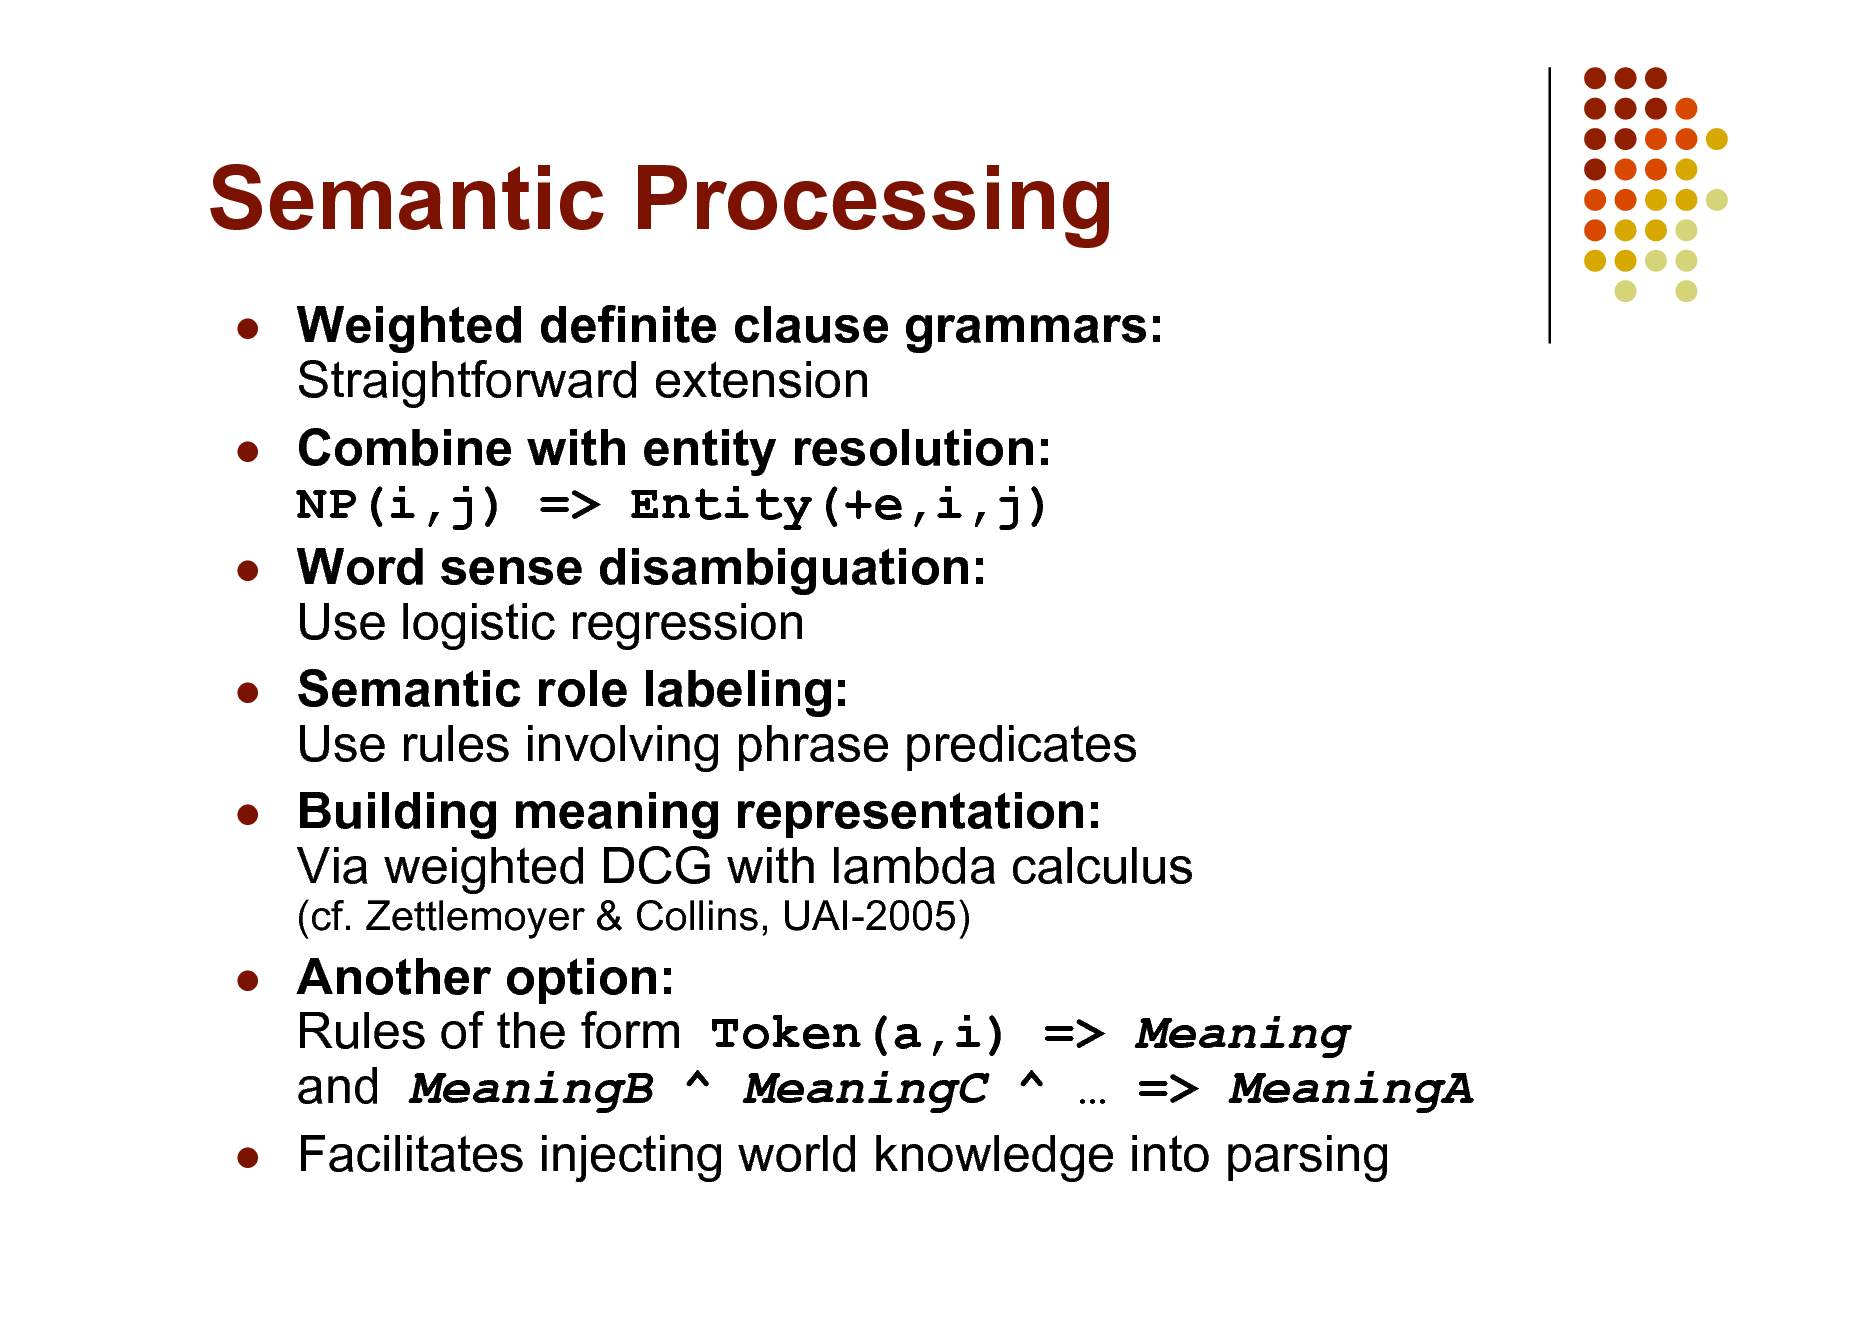 Slide: Semantic Processing
    

Weighted definite clause grammars: Straightforward extension Combine with entity resolution: NP(i,j) => Entity(+e,i,j) Word sense disambiguation: Use logistic regression Semantic role labeling: Use rules involving phrase predicates Building meaning representation: Via weighted DCG with lambda calculus
(cf. Zettlemoyer & Collins, UAI-2005)





Another option: Rules of the form Token(a,i) => Meaning and MeaningB ^ MeaningC ^  => MeaningA Facilitates injecting world knowledge into parsing

